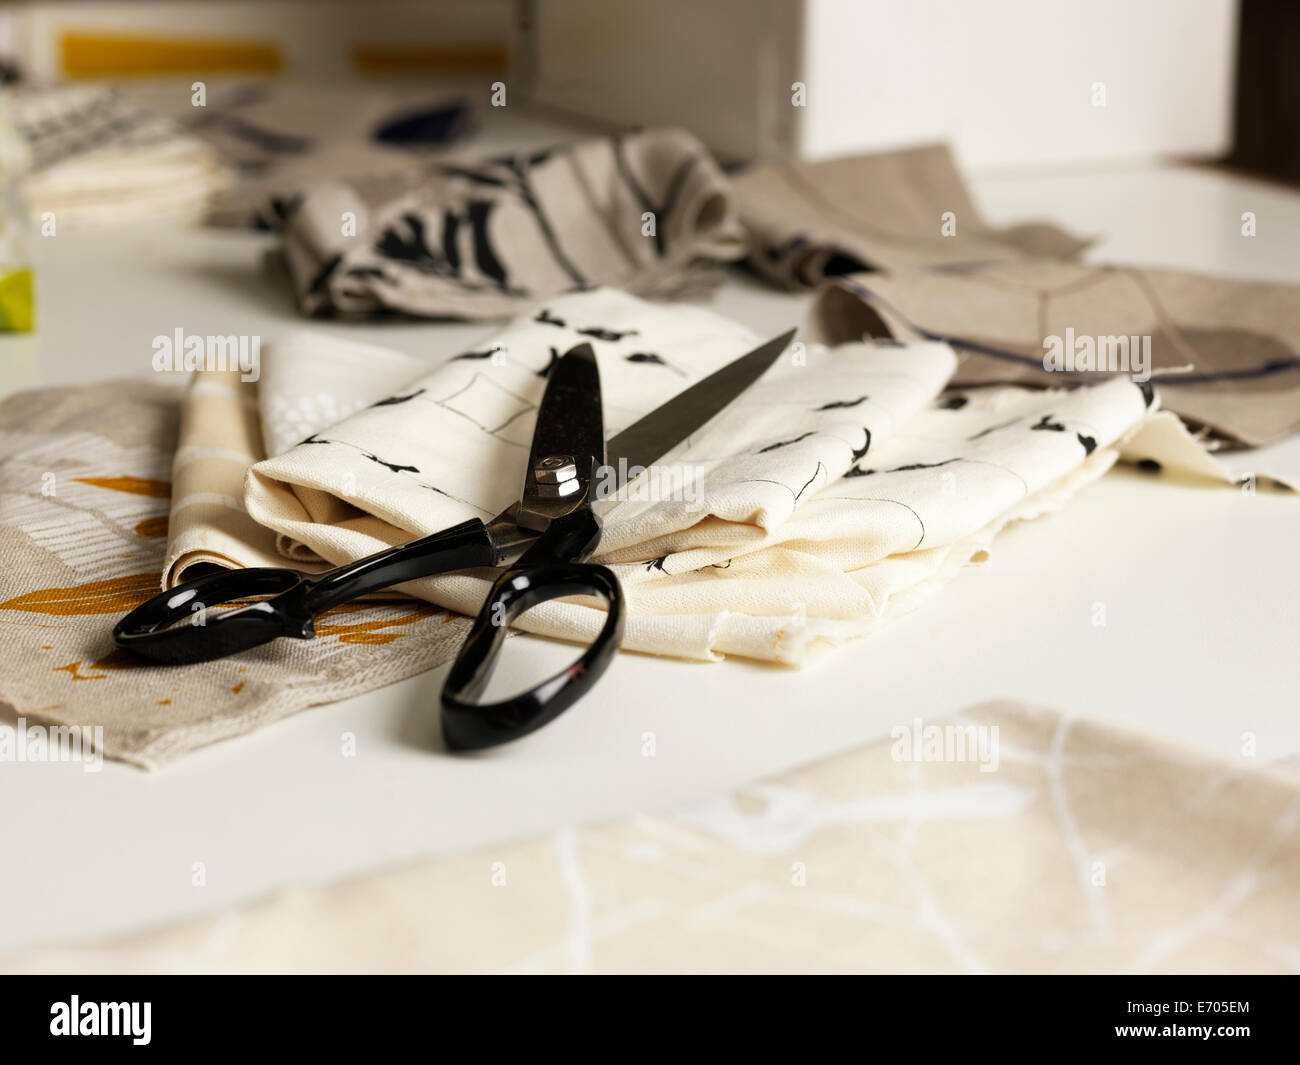 Pair of scissors and fabric on work table Stock Photo